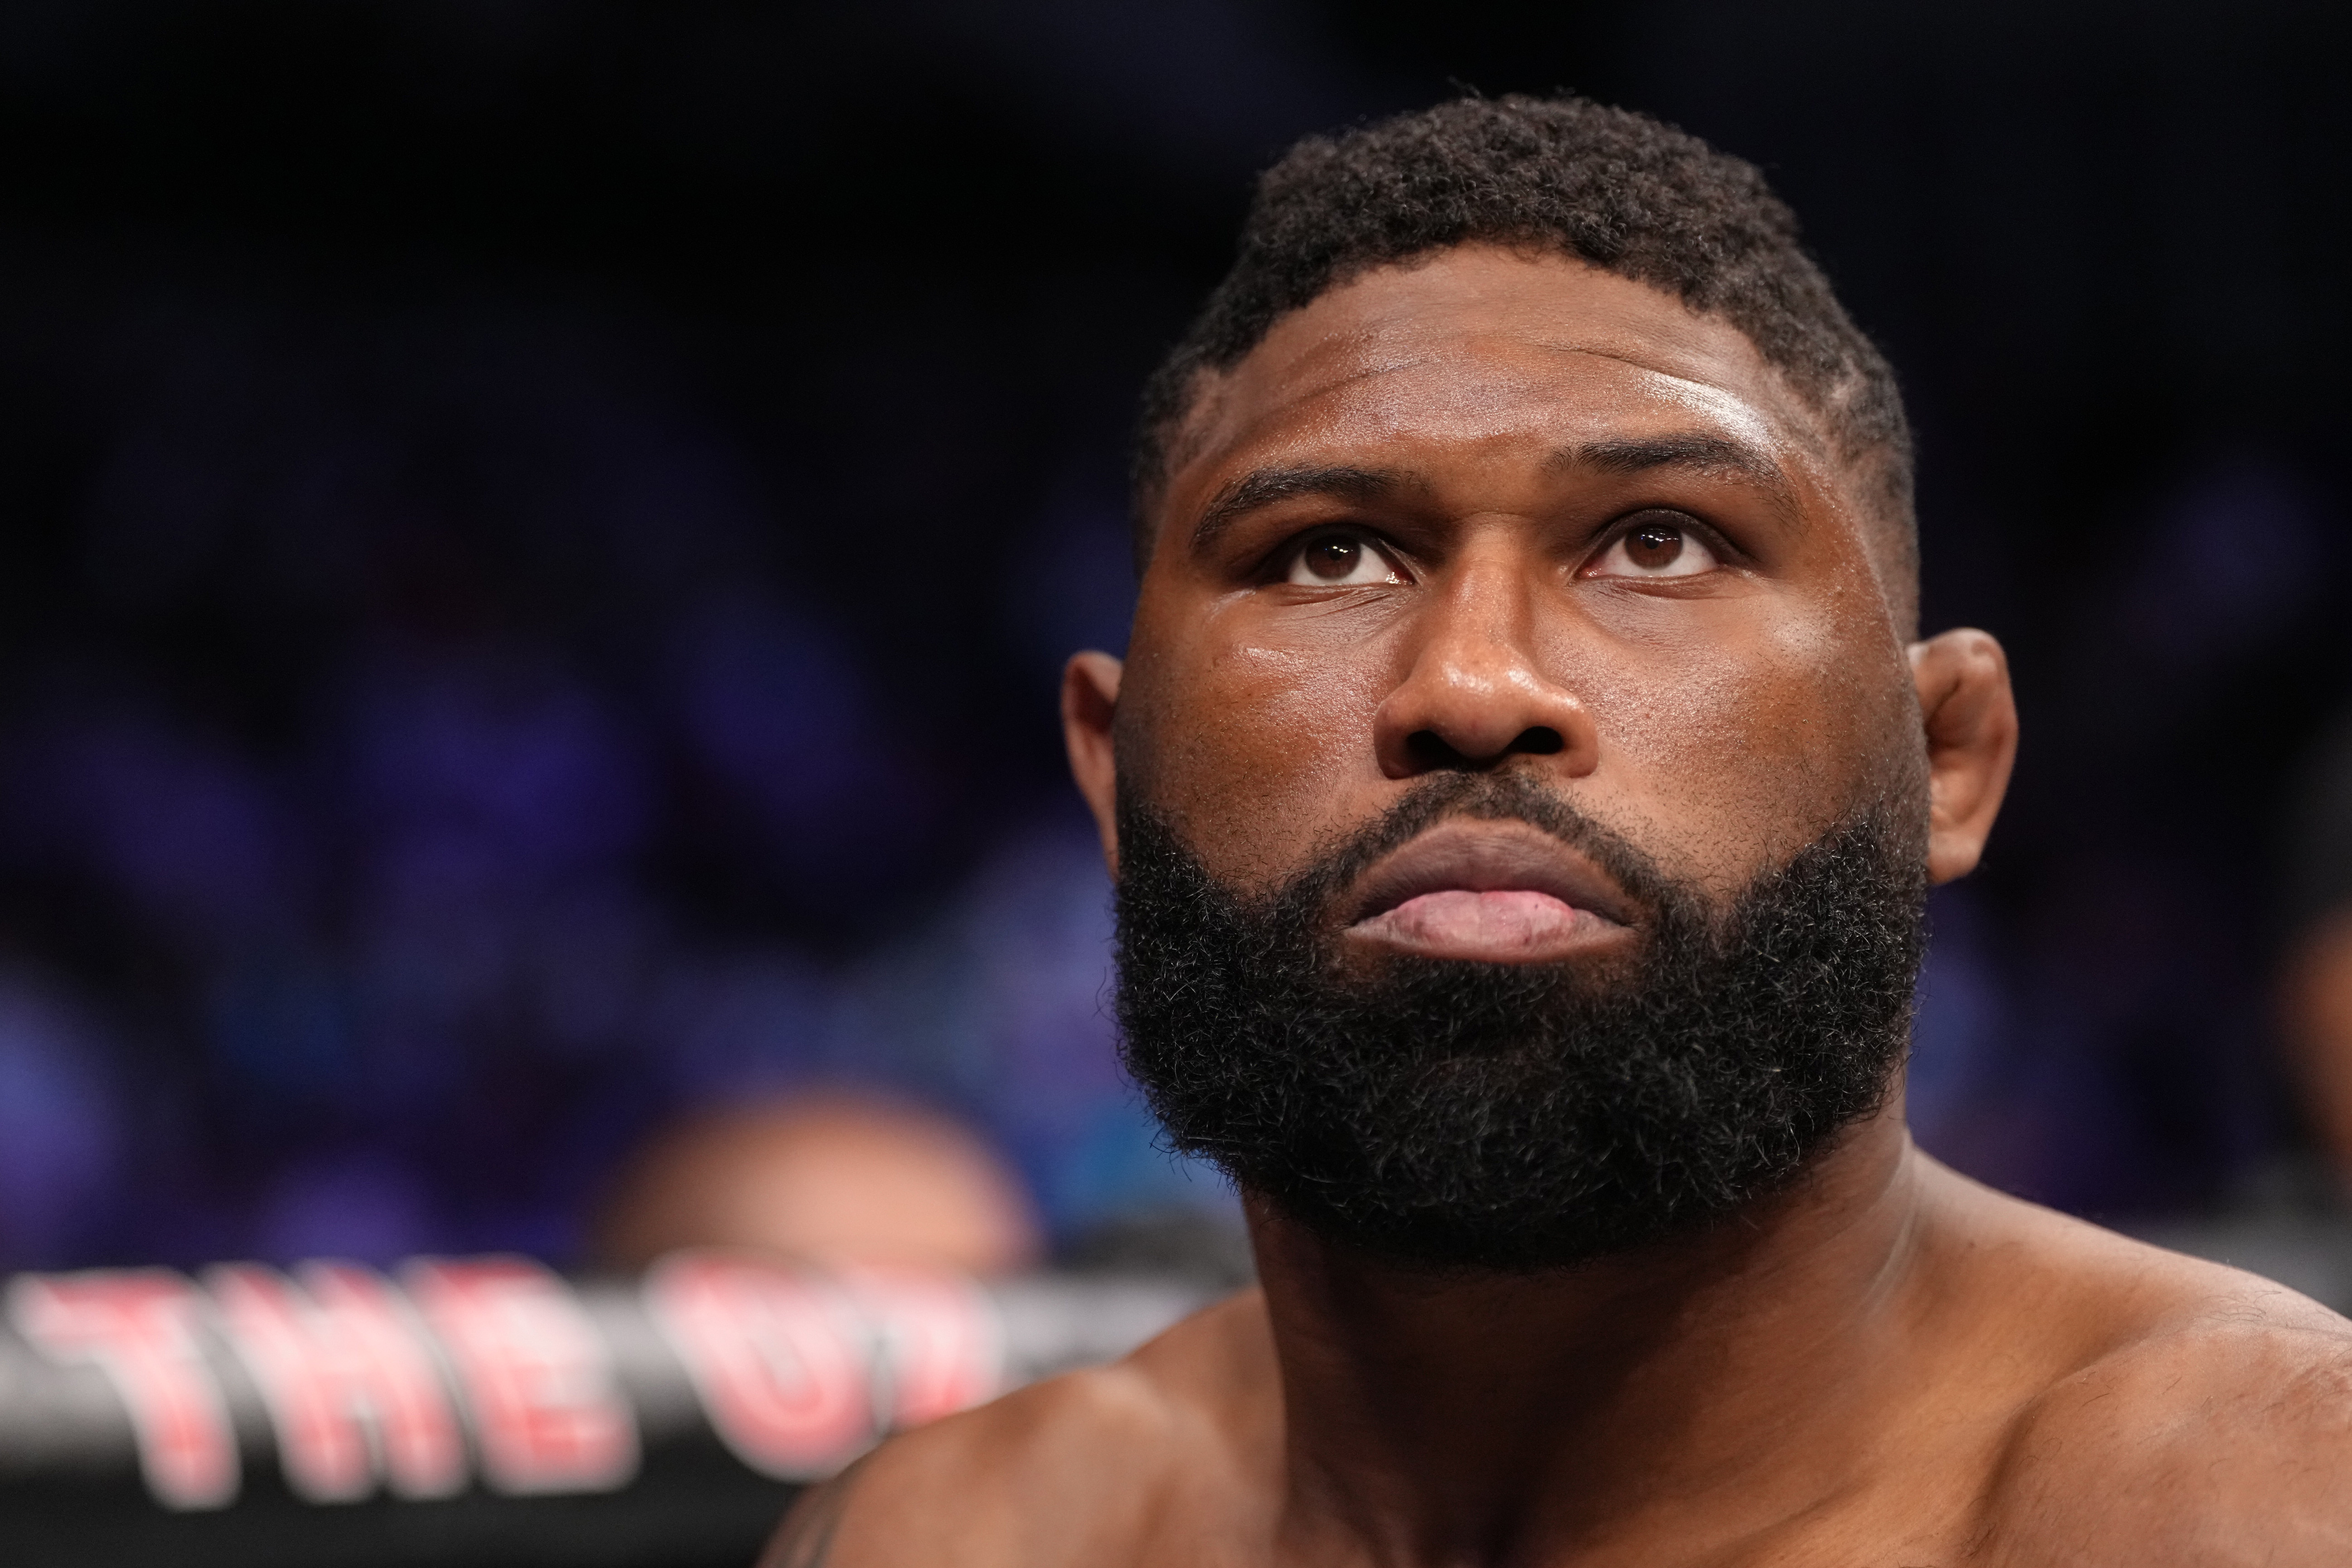 Curtis Blaydes has his eyes on fighting for the UFC heavyweight title